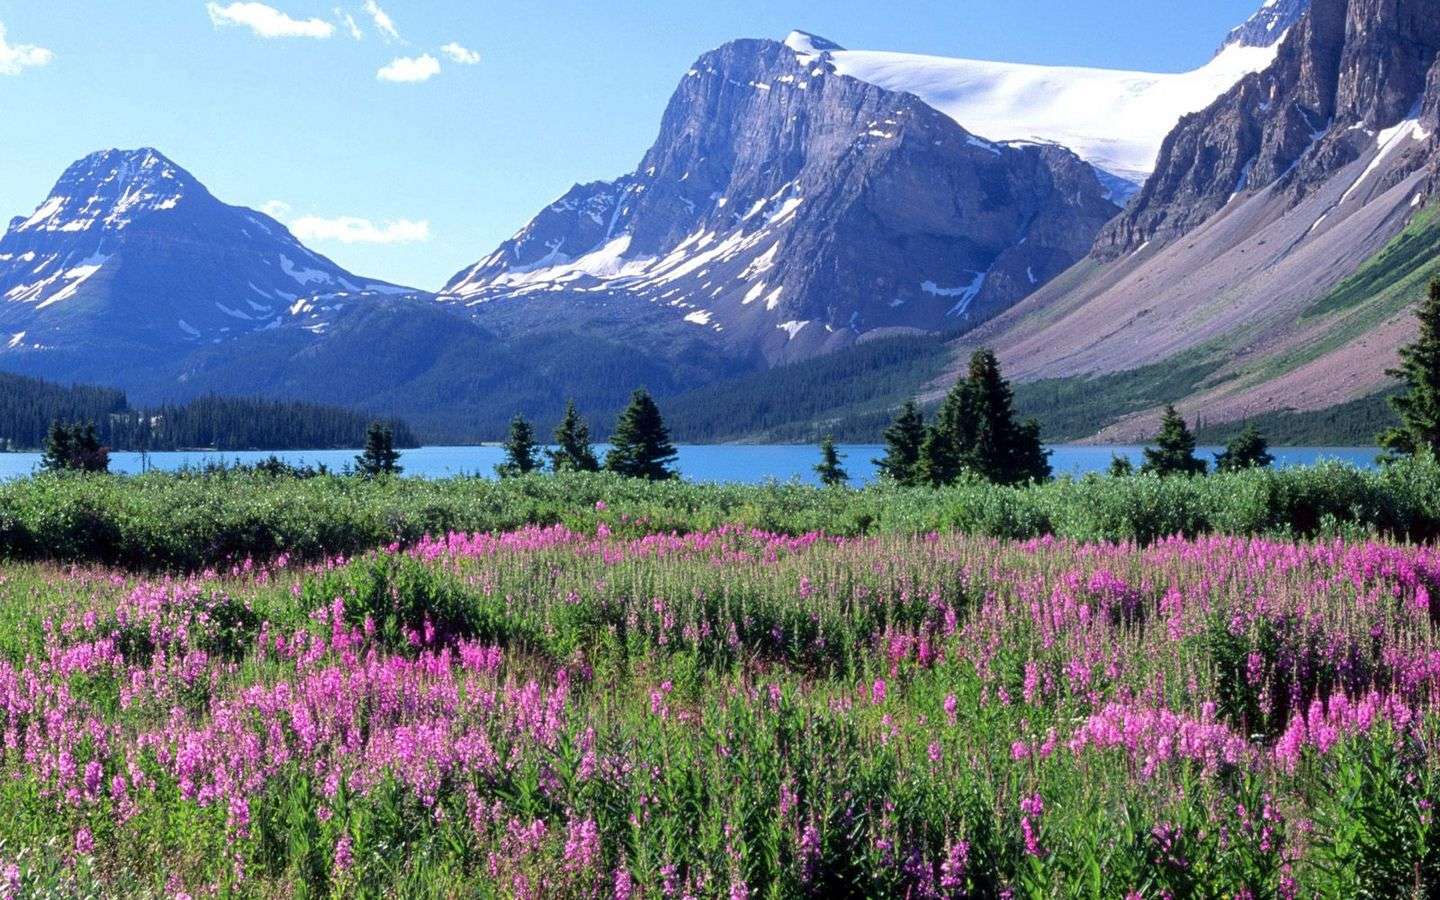 mountains_trees_flowers_lake_canada_glade_8245_144 online puzzle